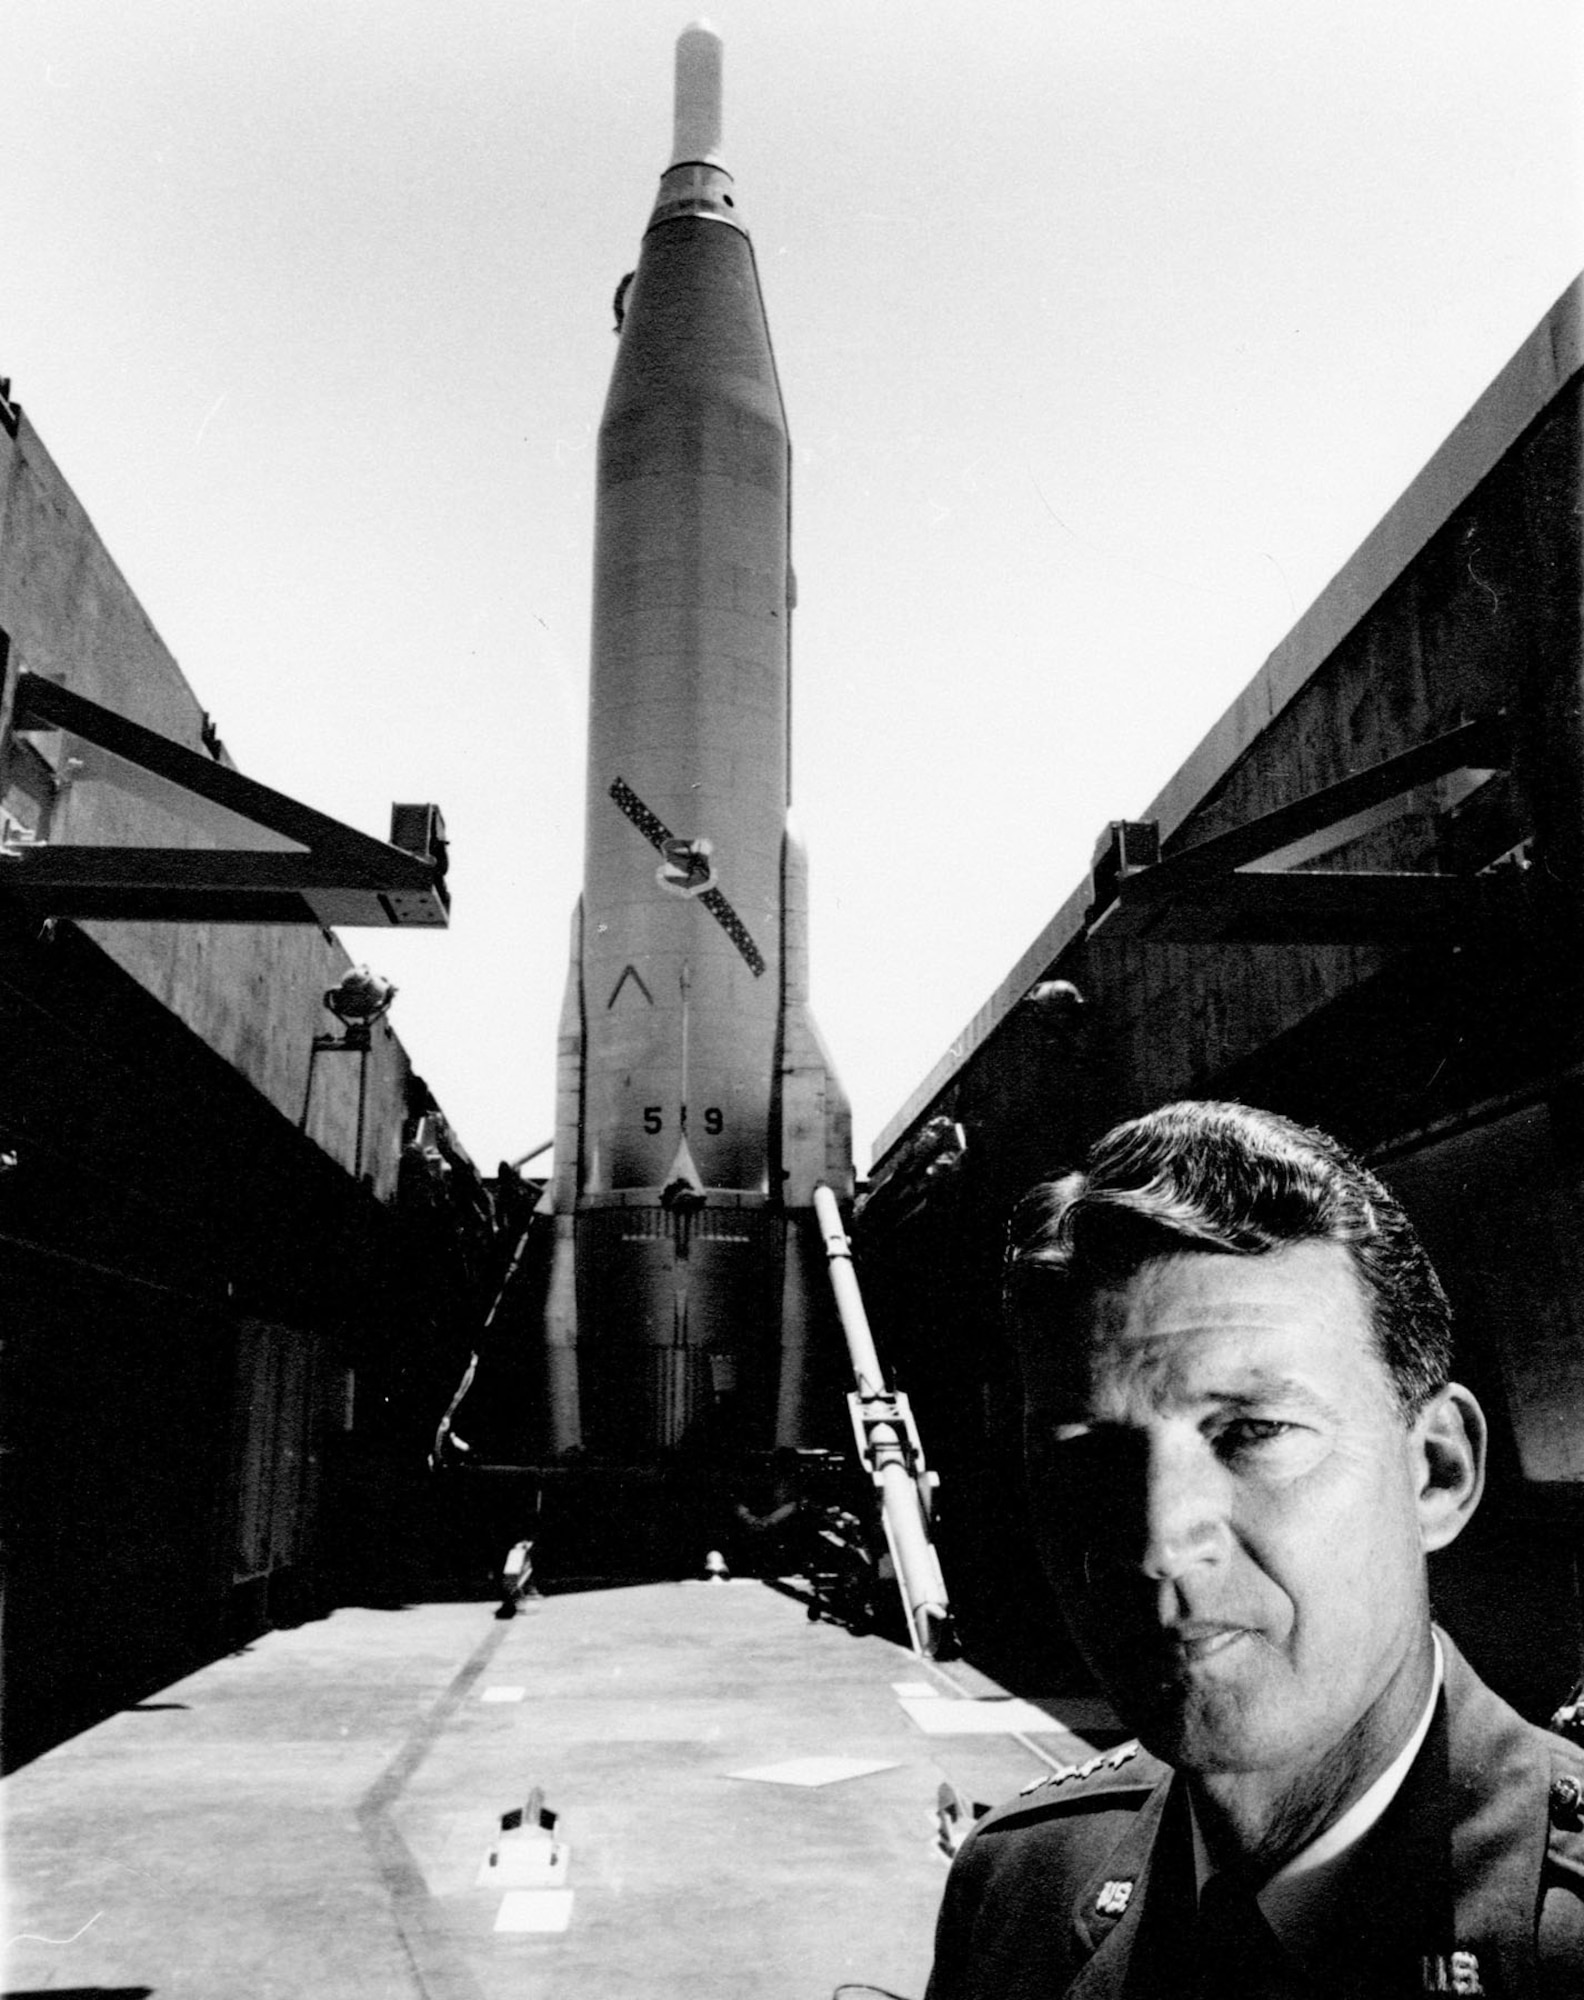 Atlas, the Air Force’s first Intercontinental Ballistic Missile, was a national priority and one of Gen. Schriever’s major achievements. (U.S. Air Force photo)